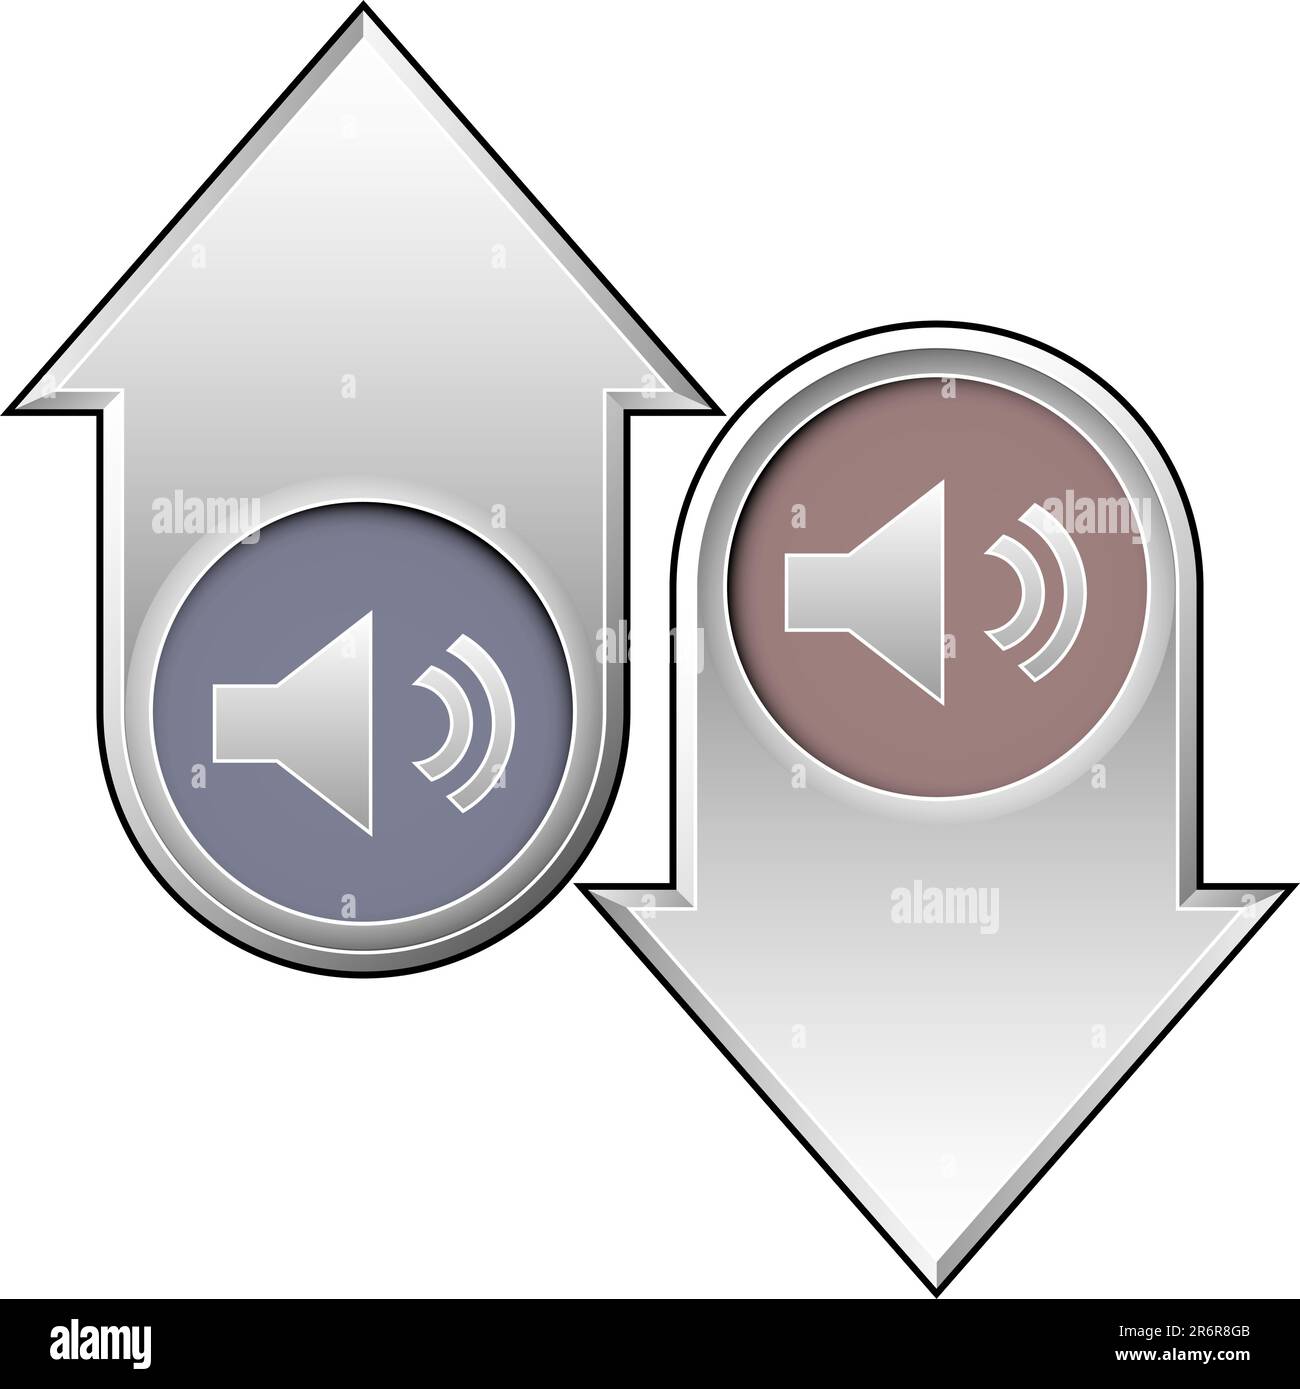 Volume or mute media player icon on up and down arrow buttons Stock Vector